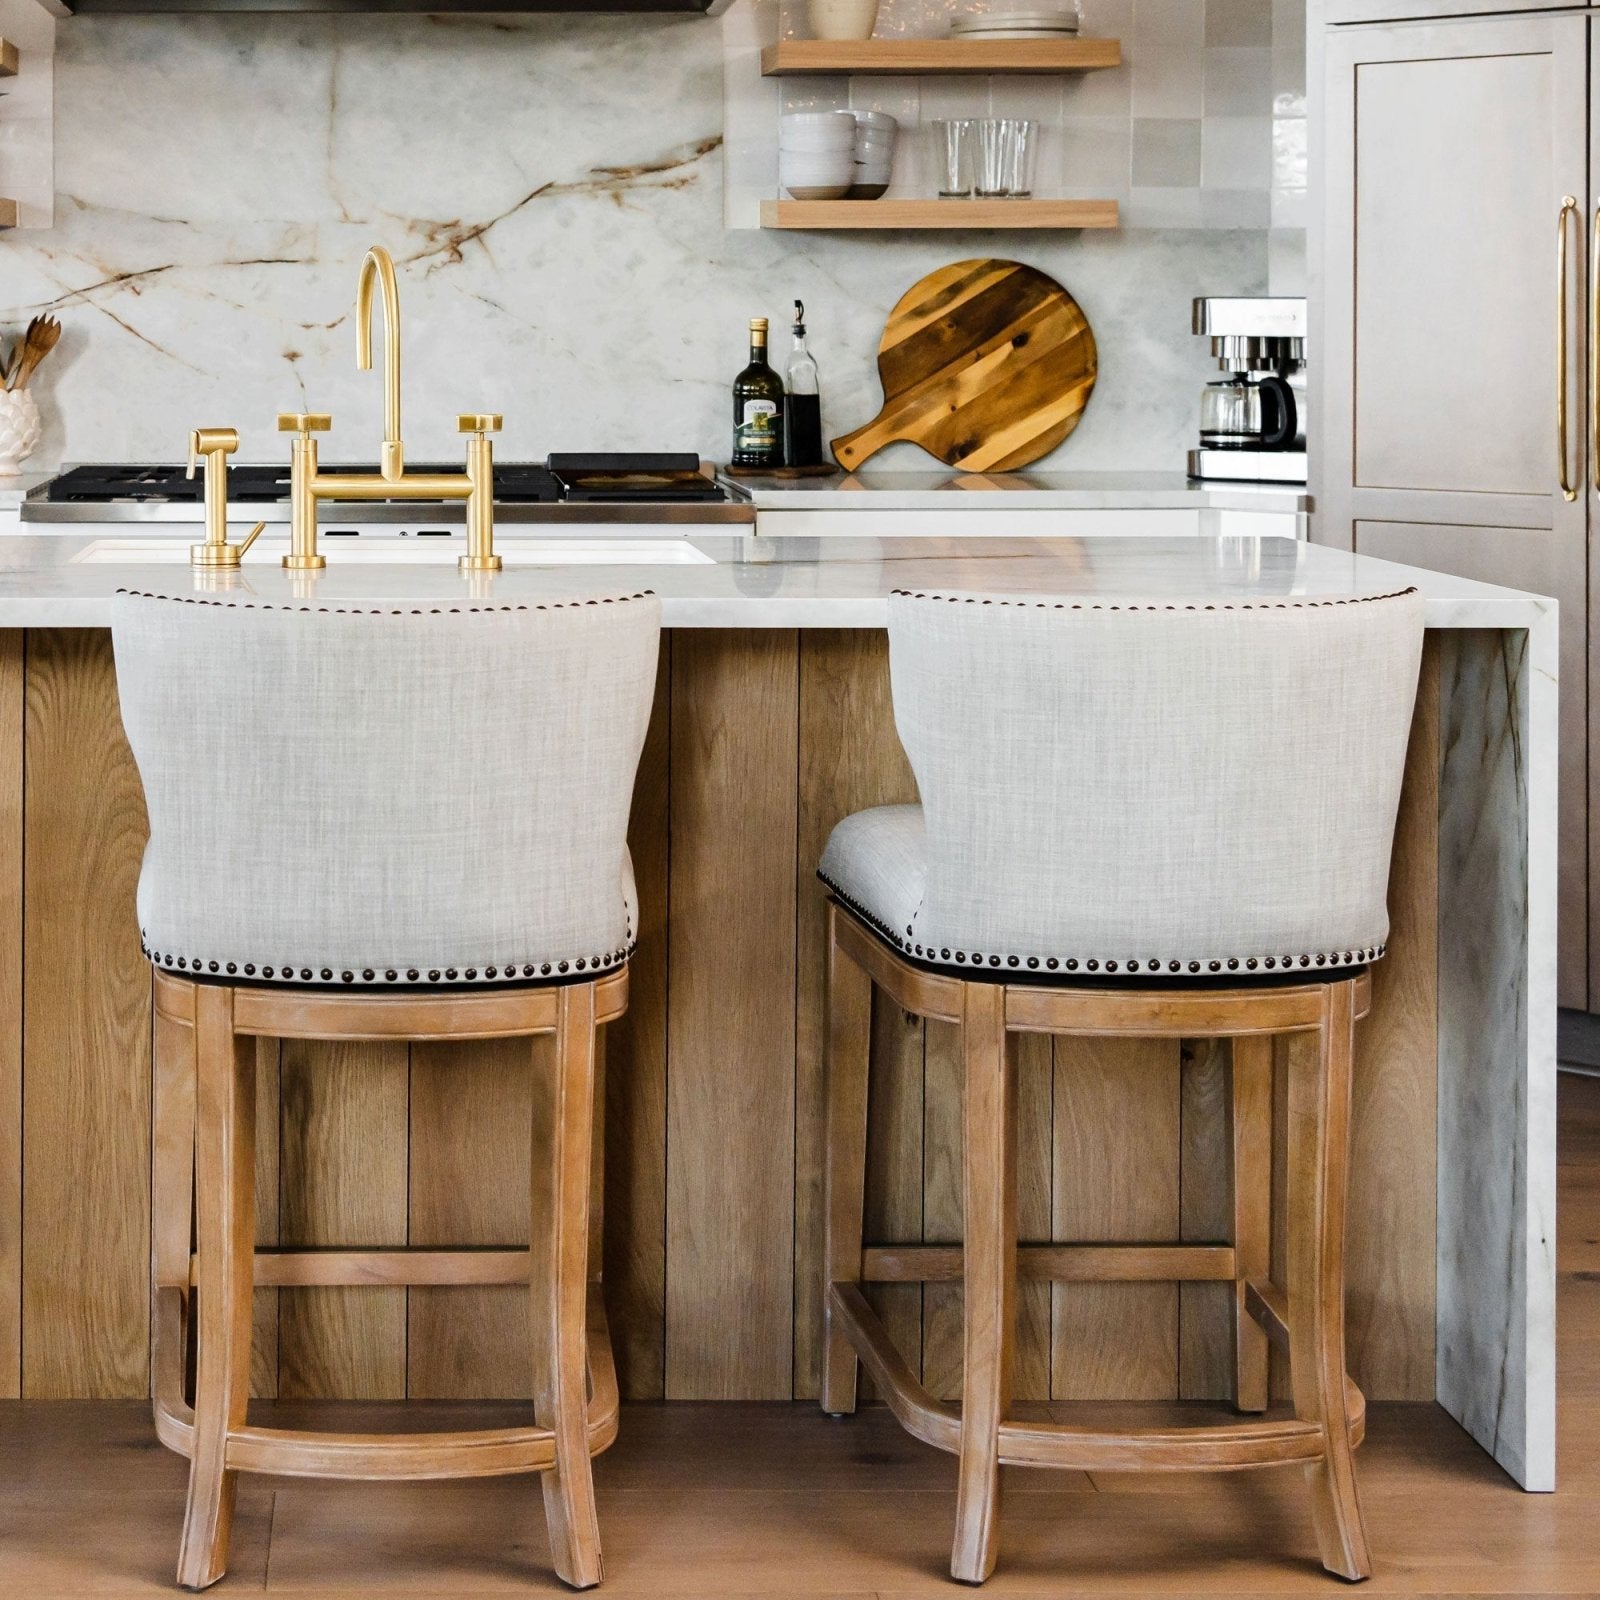 Hugo Bar Stool in Weathered Oak Finish with Sand Color Fabric Upholstery in Stools by Maven Lane